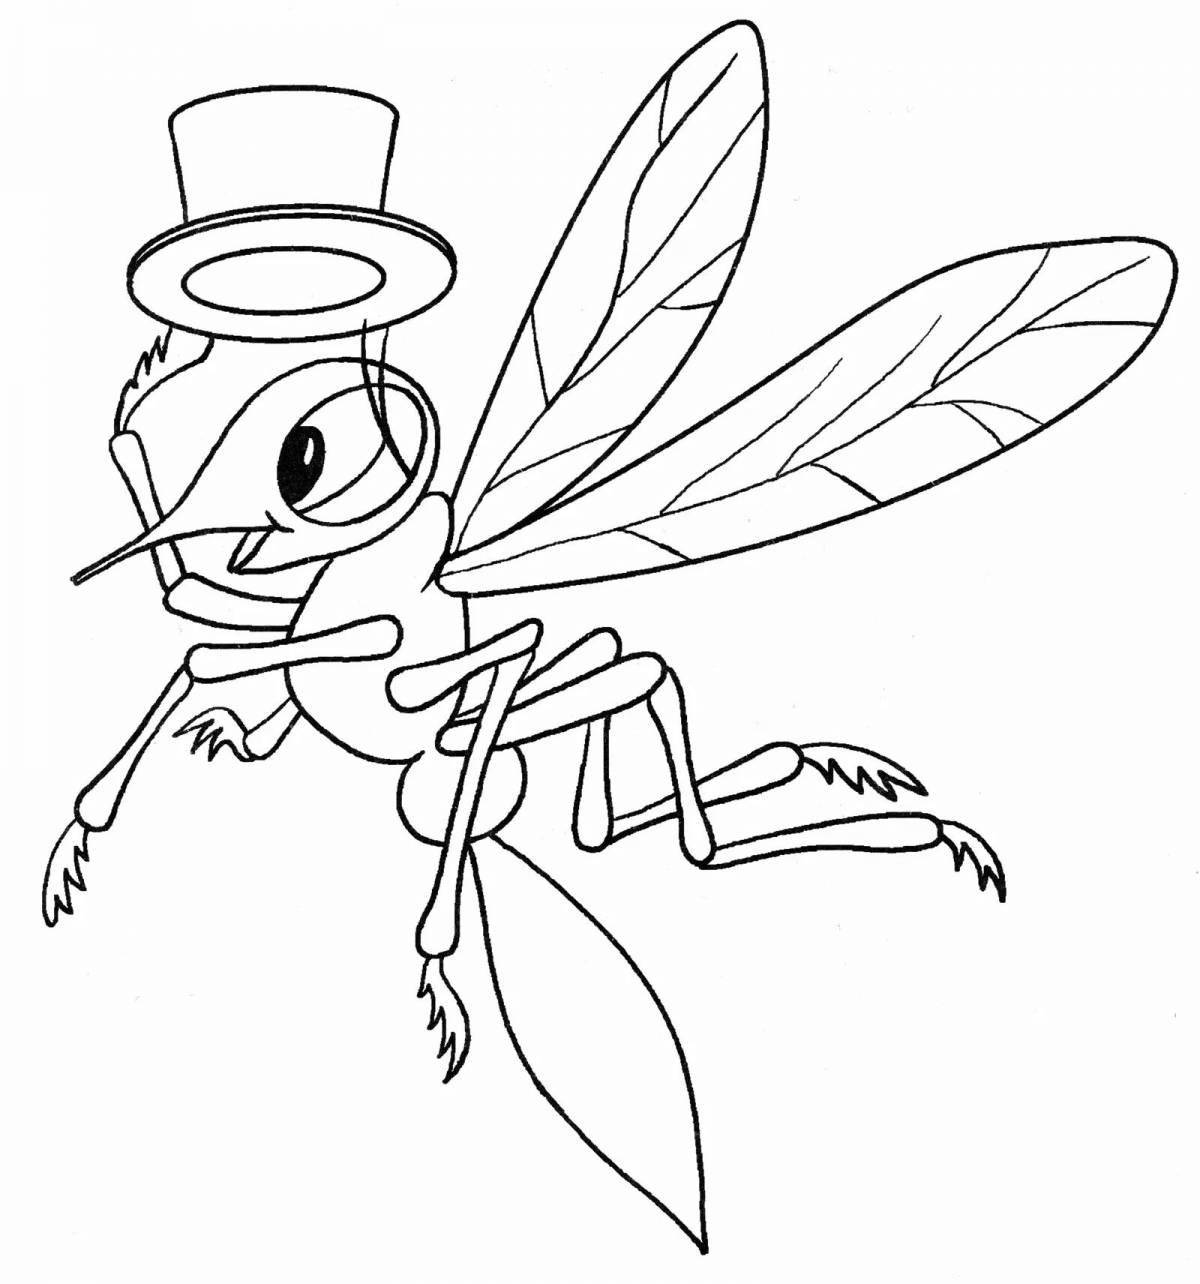 Bright mosquito coloring page